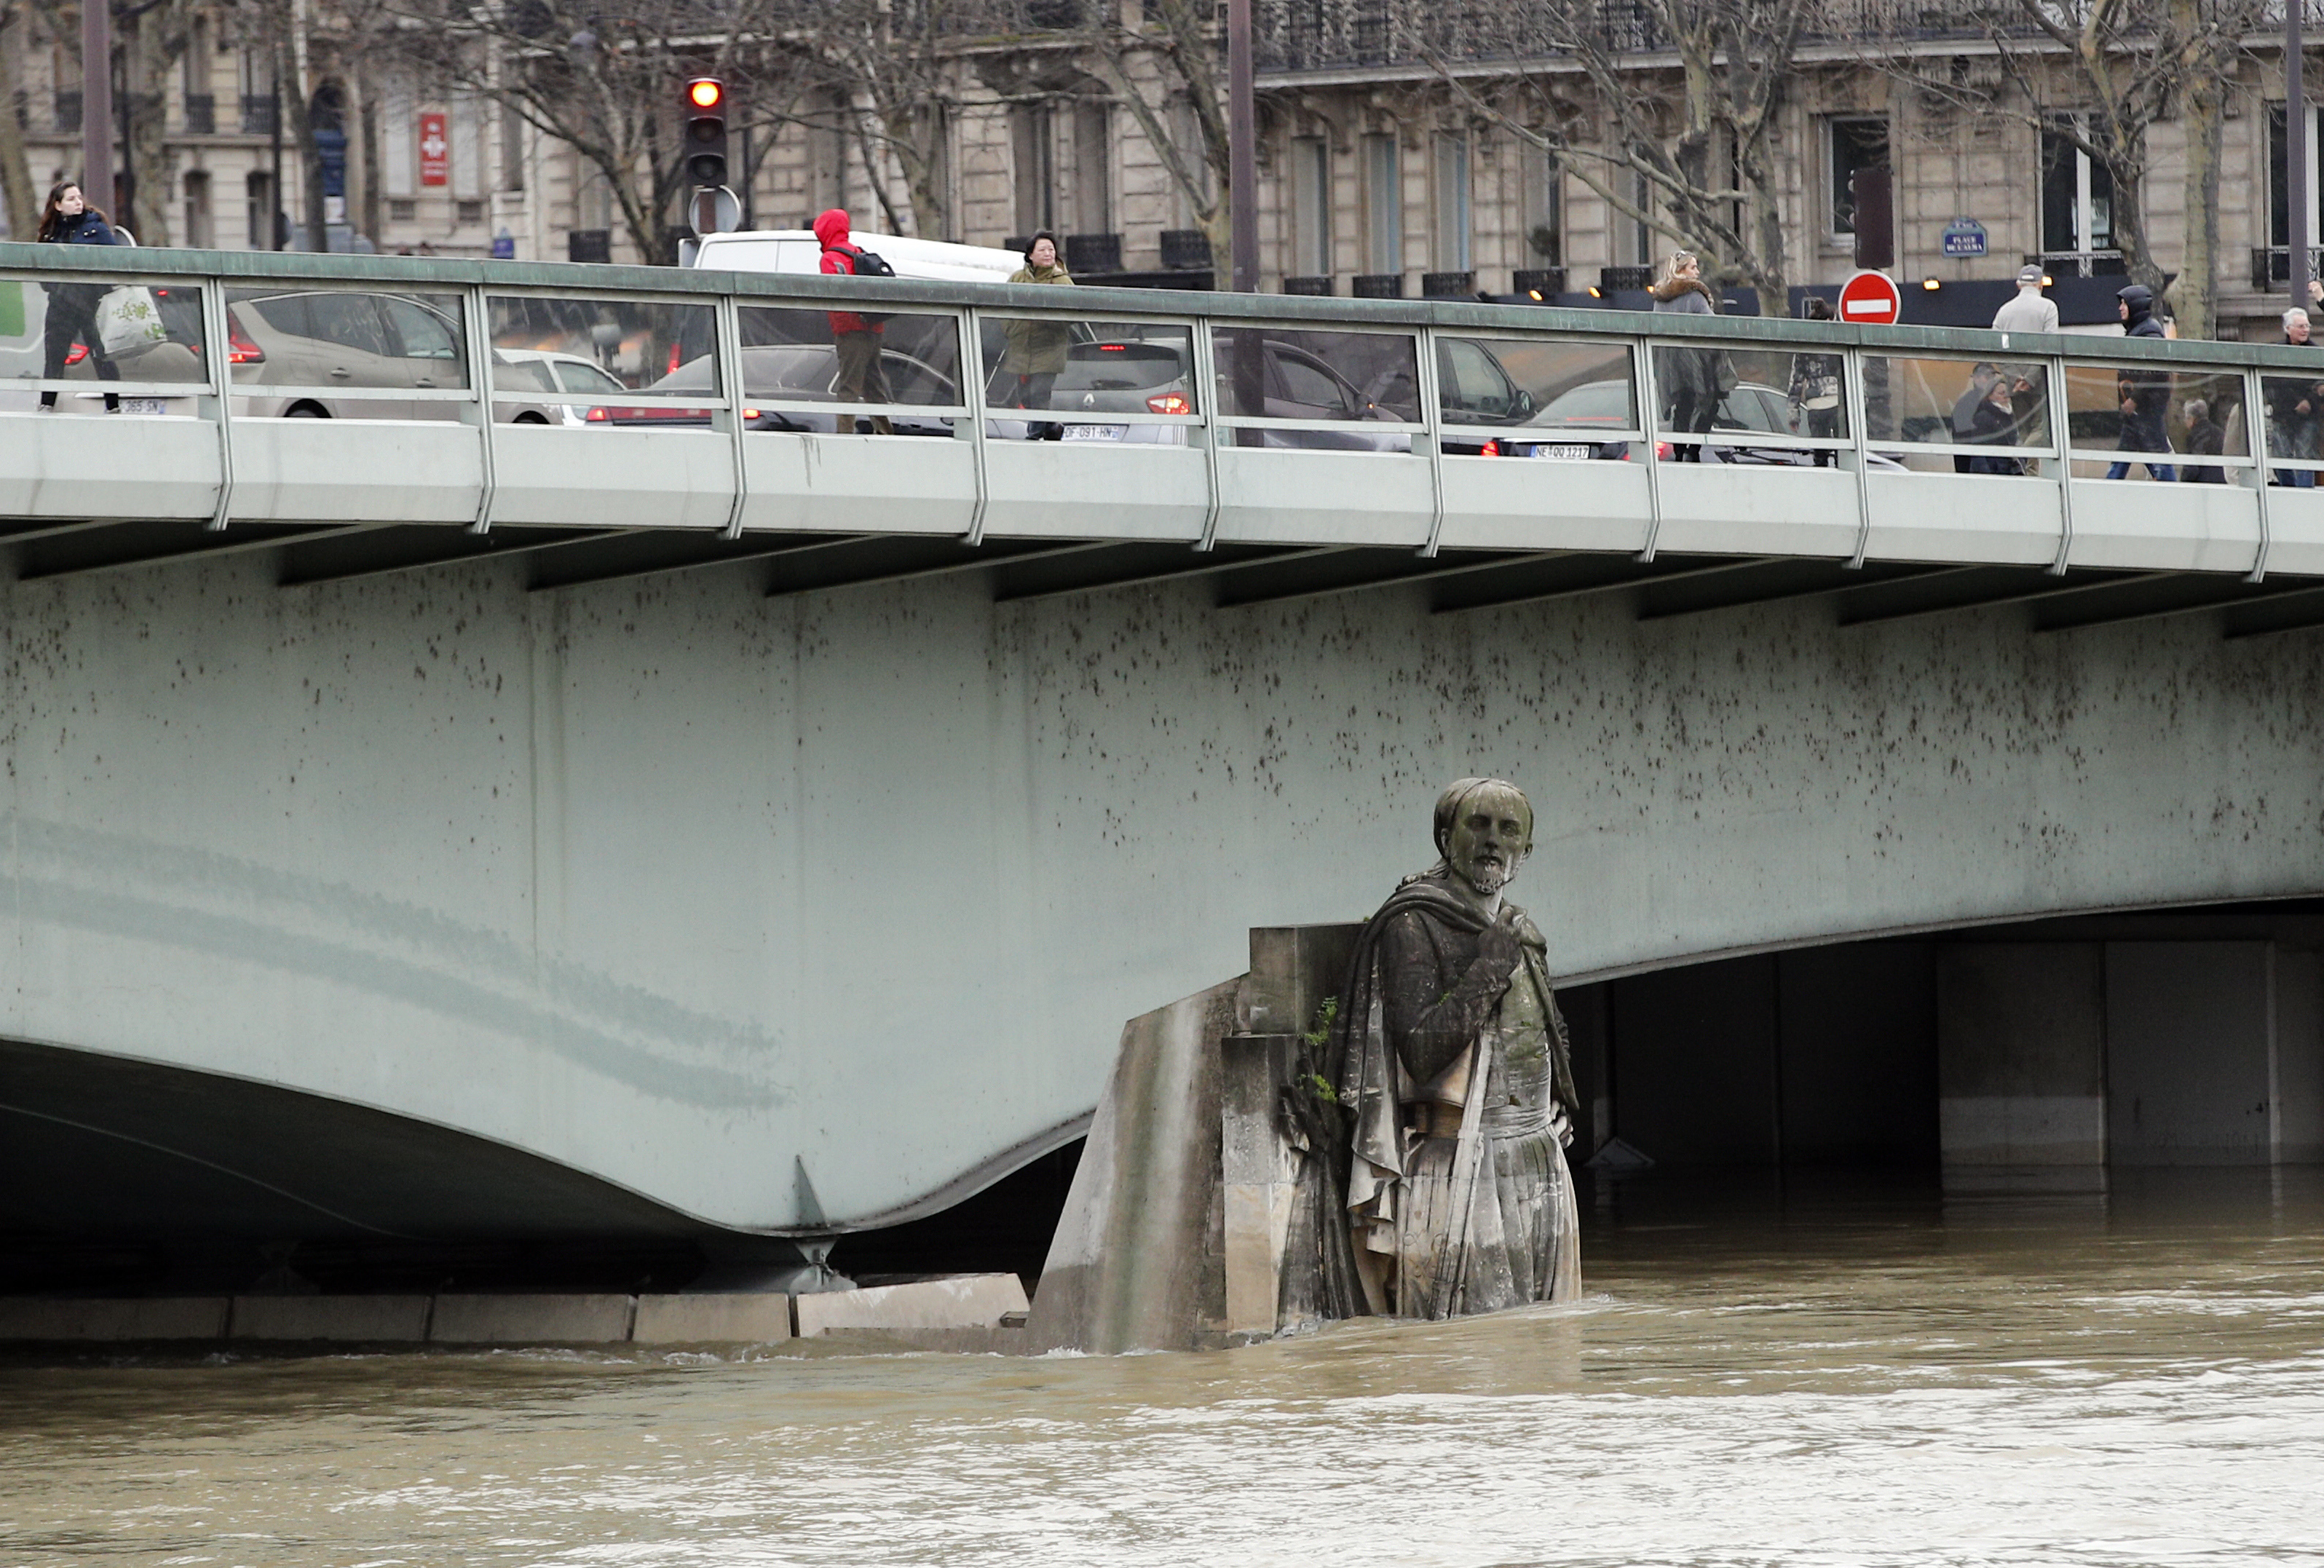 People walk on the Alma bridge by the Zouave statue which is used as a measuring instrument during floods in Paris (Christophe Ena/AP)